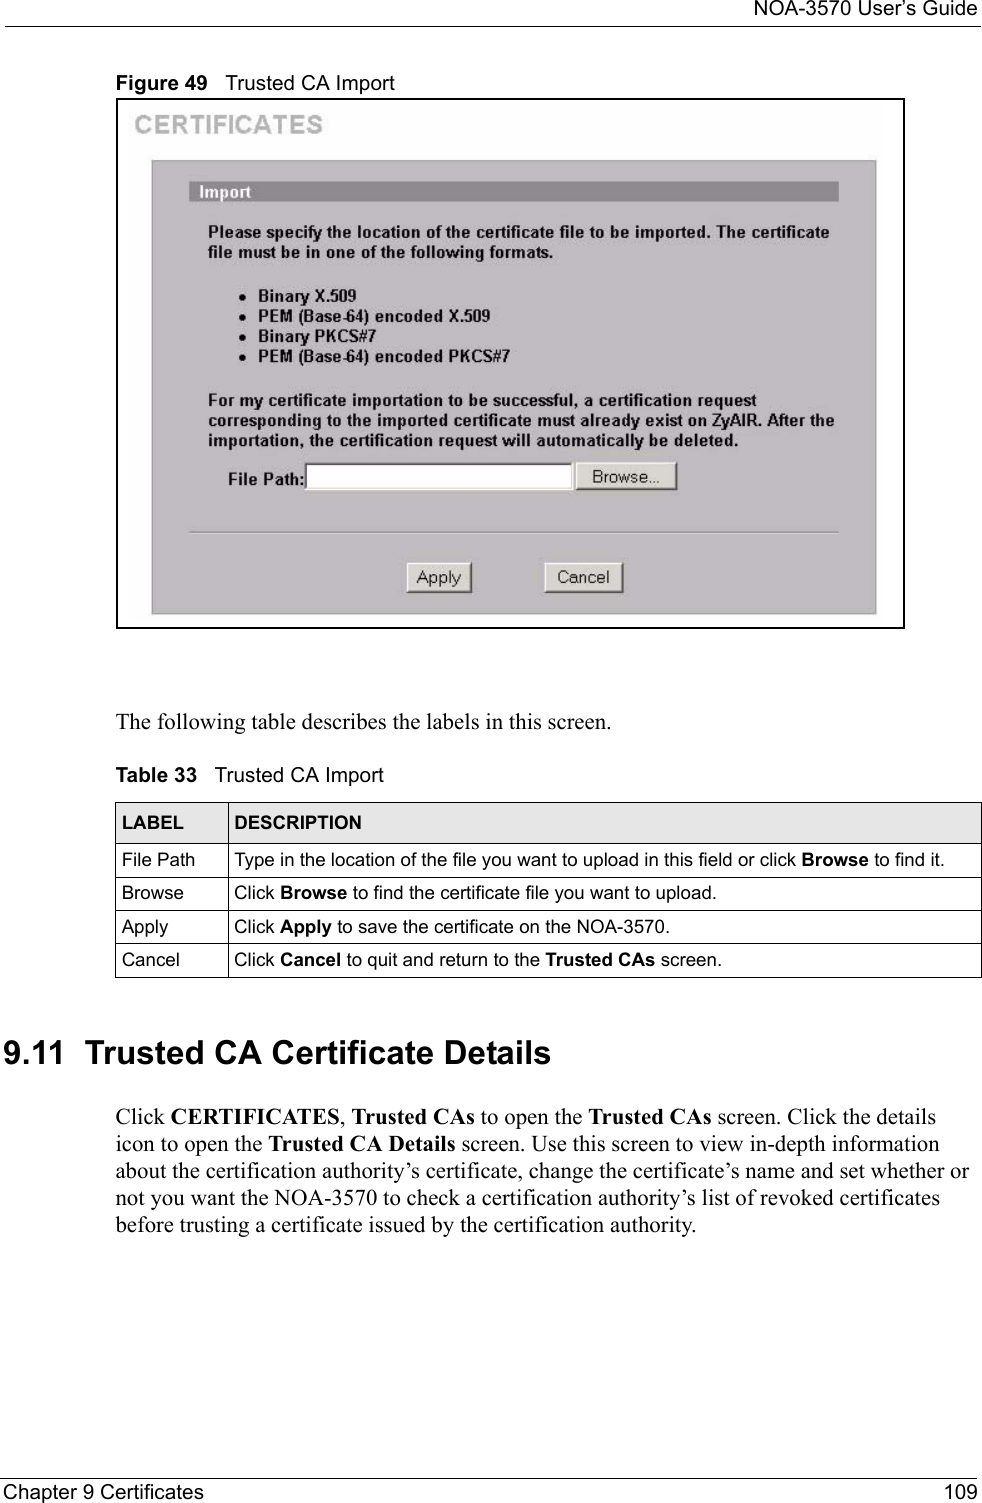 NOA-3570 User’s GuideChapter 9 Certificates 109Figure 49   Trusted CA ImportThe following table describes the labels in this screen.9.11  Trusted CA Certificate DetailsClick CERTIFICATES, Trusted CAs to open the Trusted CAs screen. Click the details icon to open the Trusted CA Details screen. Use this screen to view in-depth information about the certification authority’s certificate, change the certificate’s name and set whether or not you want the NOA-3570 to check a certification authority’s list of revoked certificates before trusting a certificate issued by the certification authority.Table 33   Trusted CA ImportLABEL DESCRIPTIONFile Path  Type in the location of the file you want to upload in this field or click Browse to find it.Browse Click Browse to find the certificate file you want to upload. Apply Click Apply to save the certificate on the NOA-3570.Cancel Click Cancel to quit and return to the Trusted CAs screen.